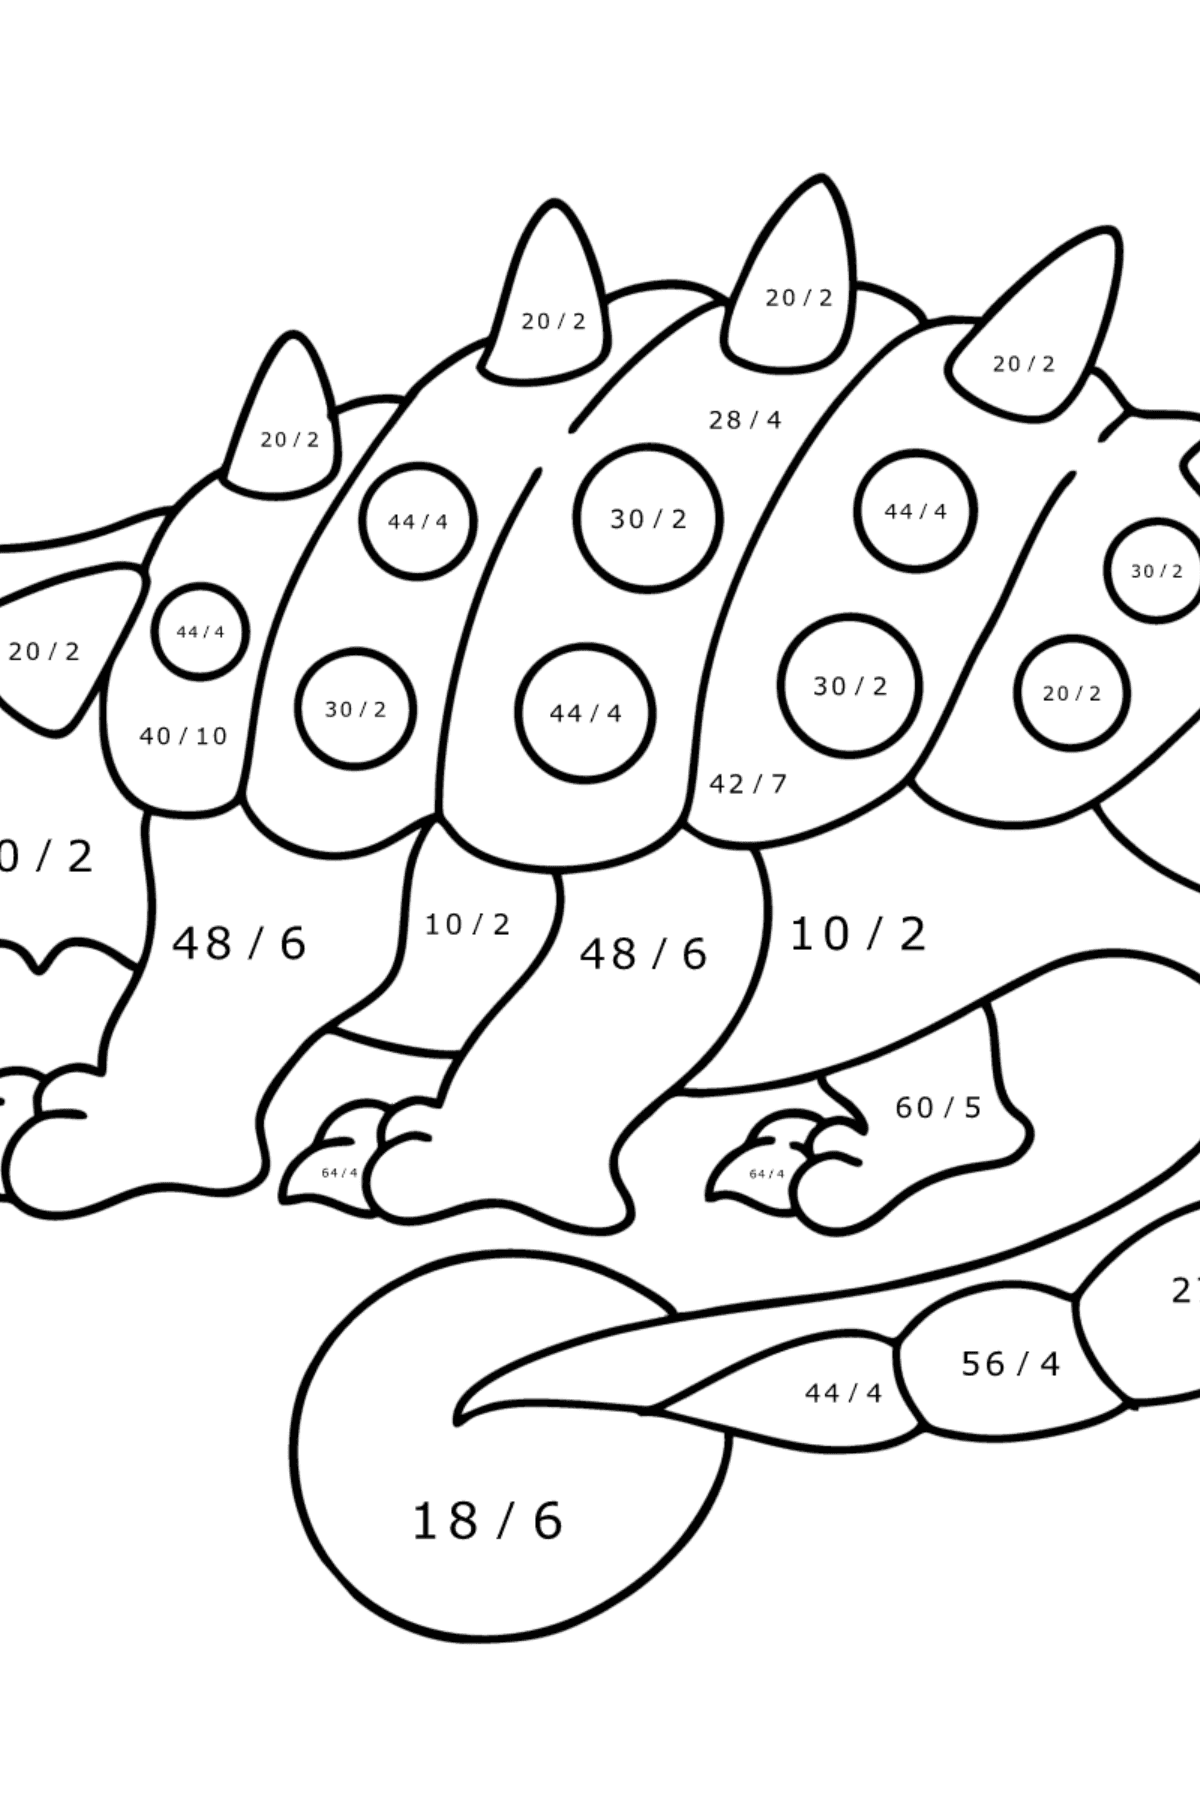 Ankylosaurus coloring page - Math Coloring - Division for Kids